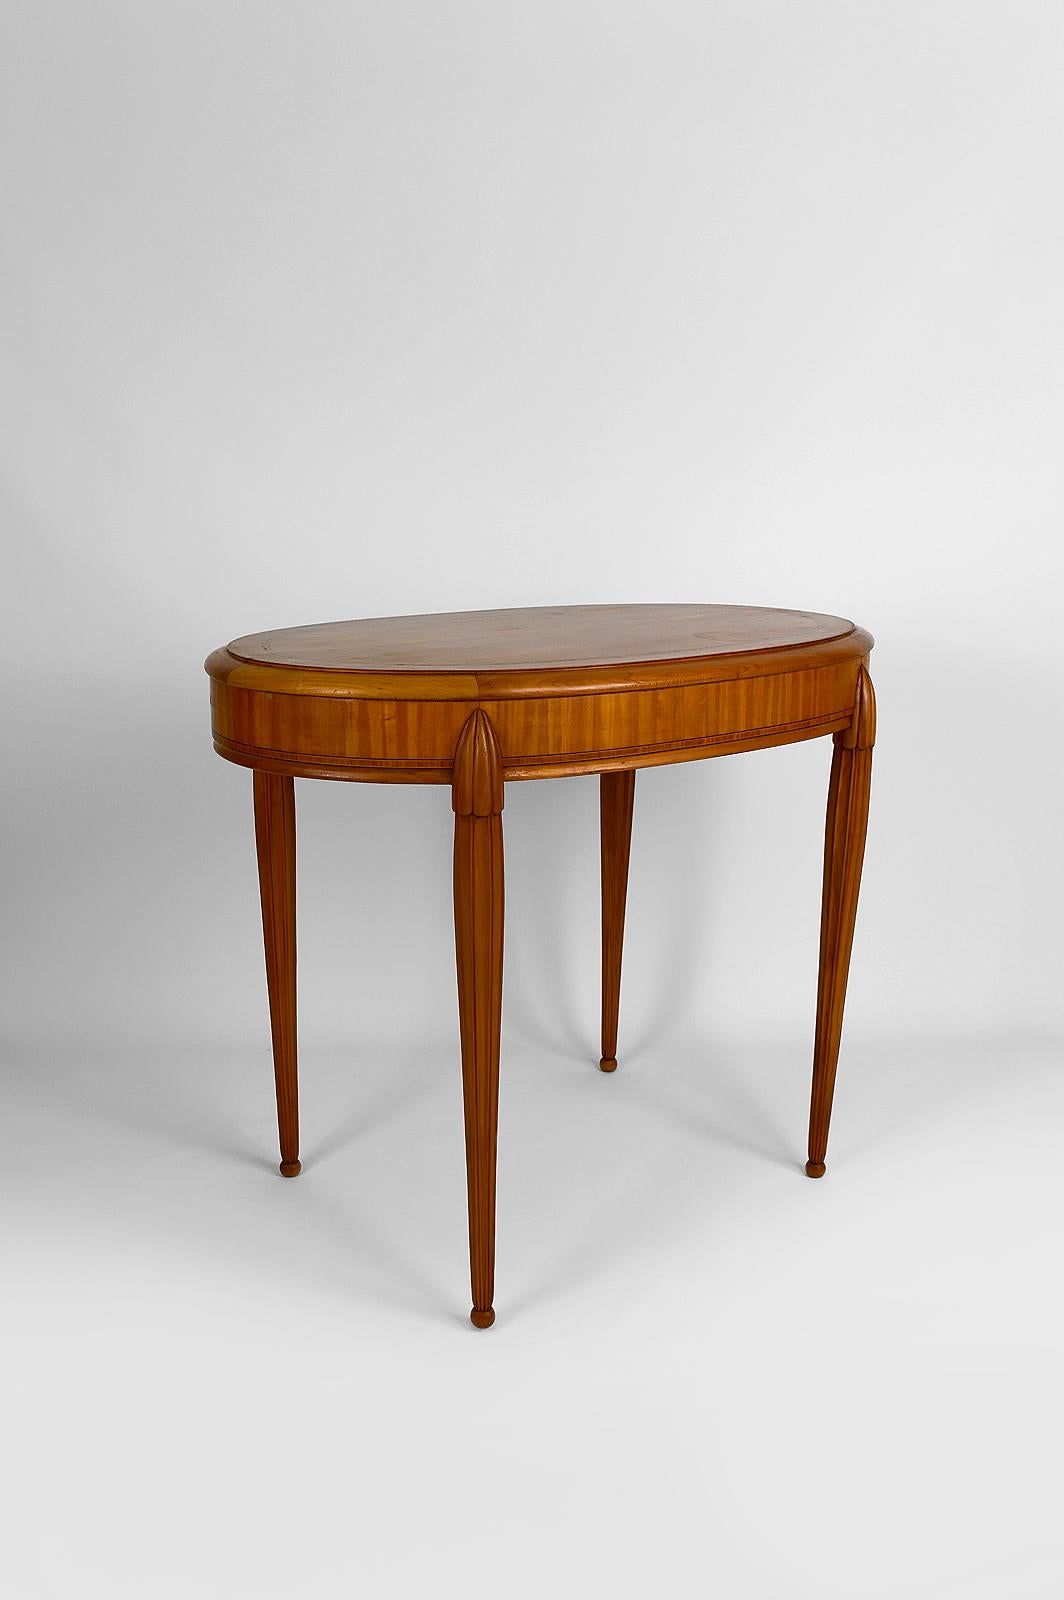 Lovely oval pedestal / side table in mahogany veneer.
With very elegant tapered legs, and fine inlay / marquetry.

Art Deco, France, around 1920-1925.
In the style of the productions of Süe & Mare, Maurice Dufrène, Paul Follot, DIM.

In good